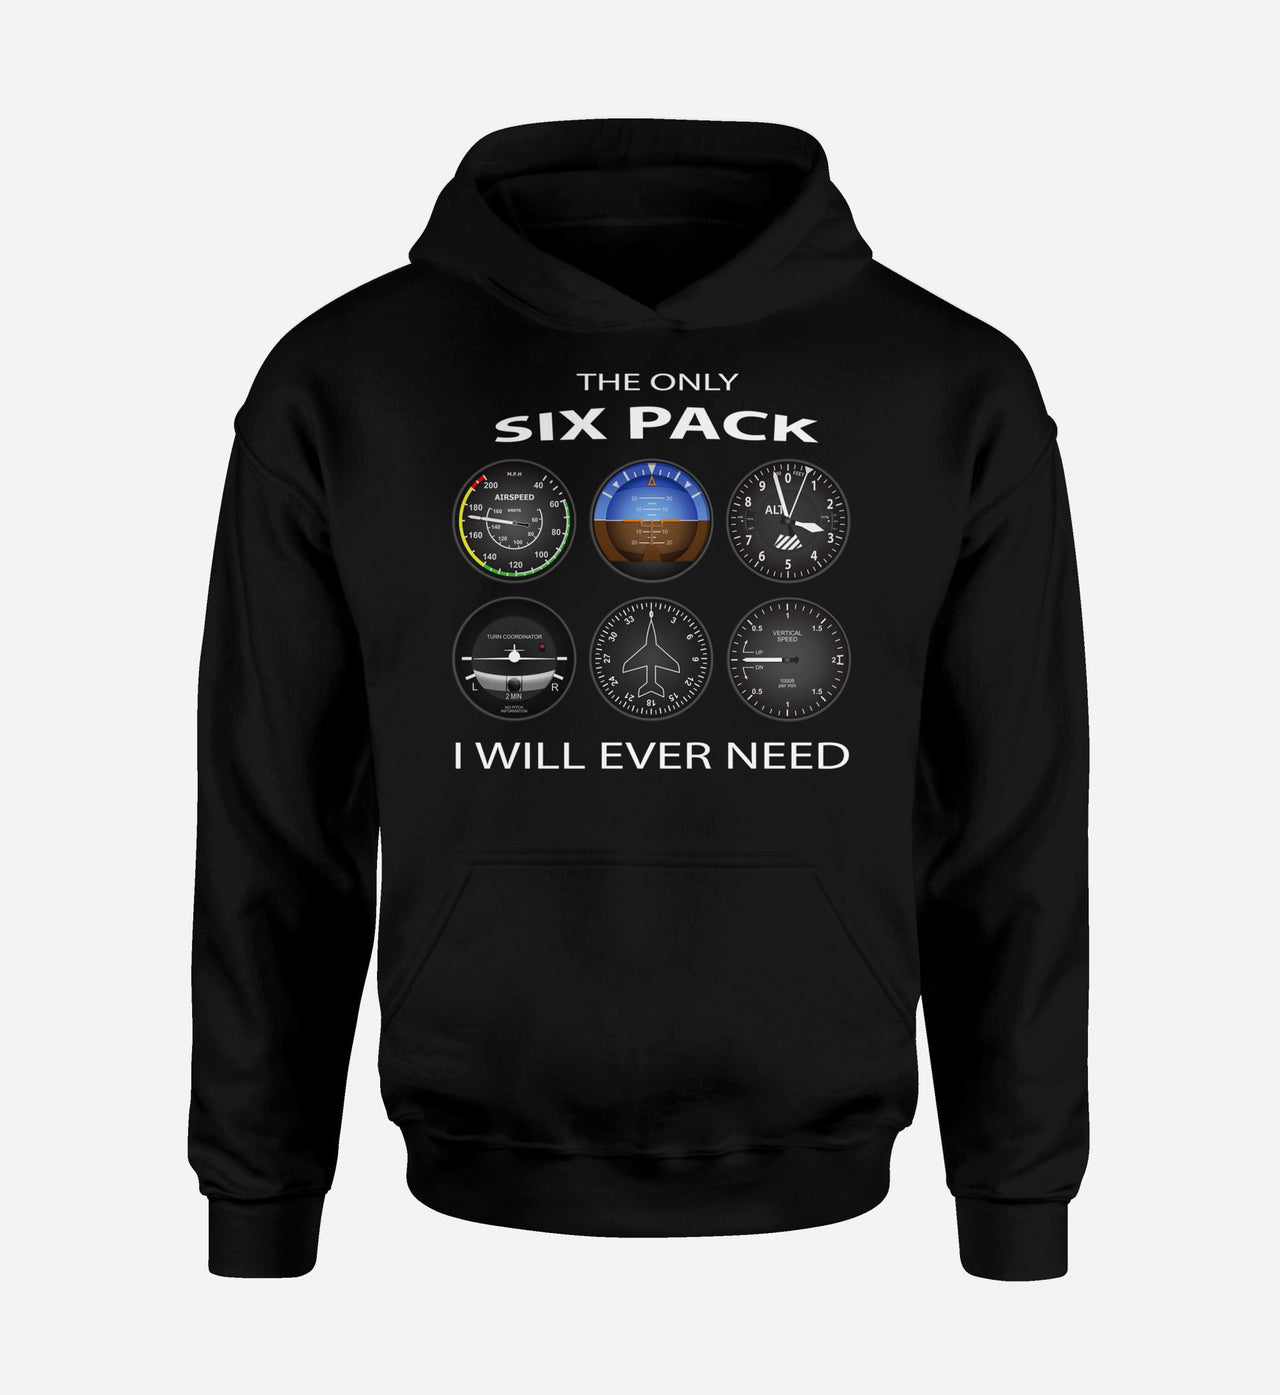 The Only Six Pack I Will Ever Need Designed Hoodies